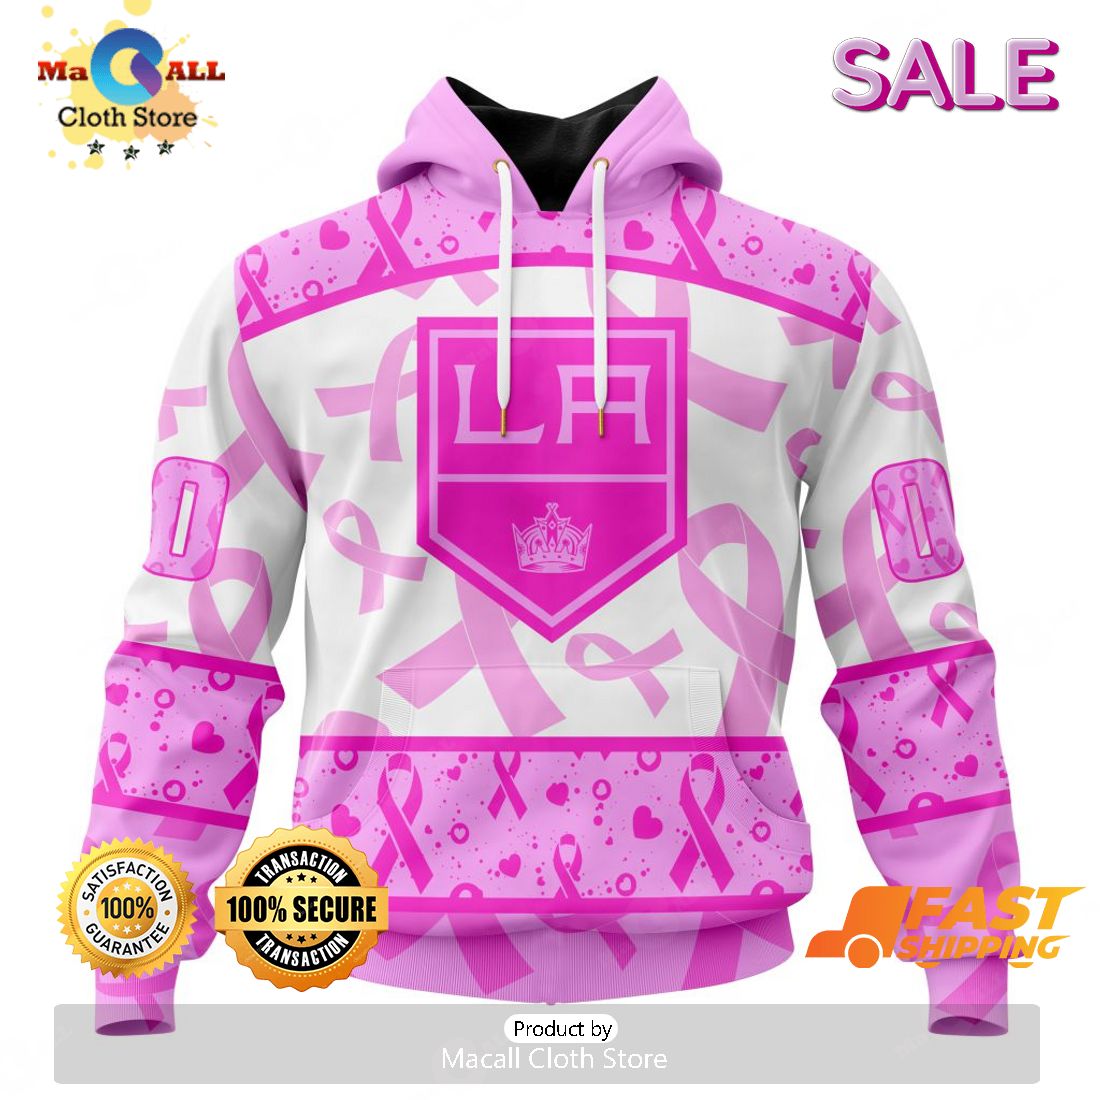 Los Angeles Kings NHL Special Pink Breast Cancer Hockey Jersey